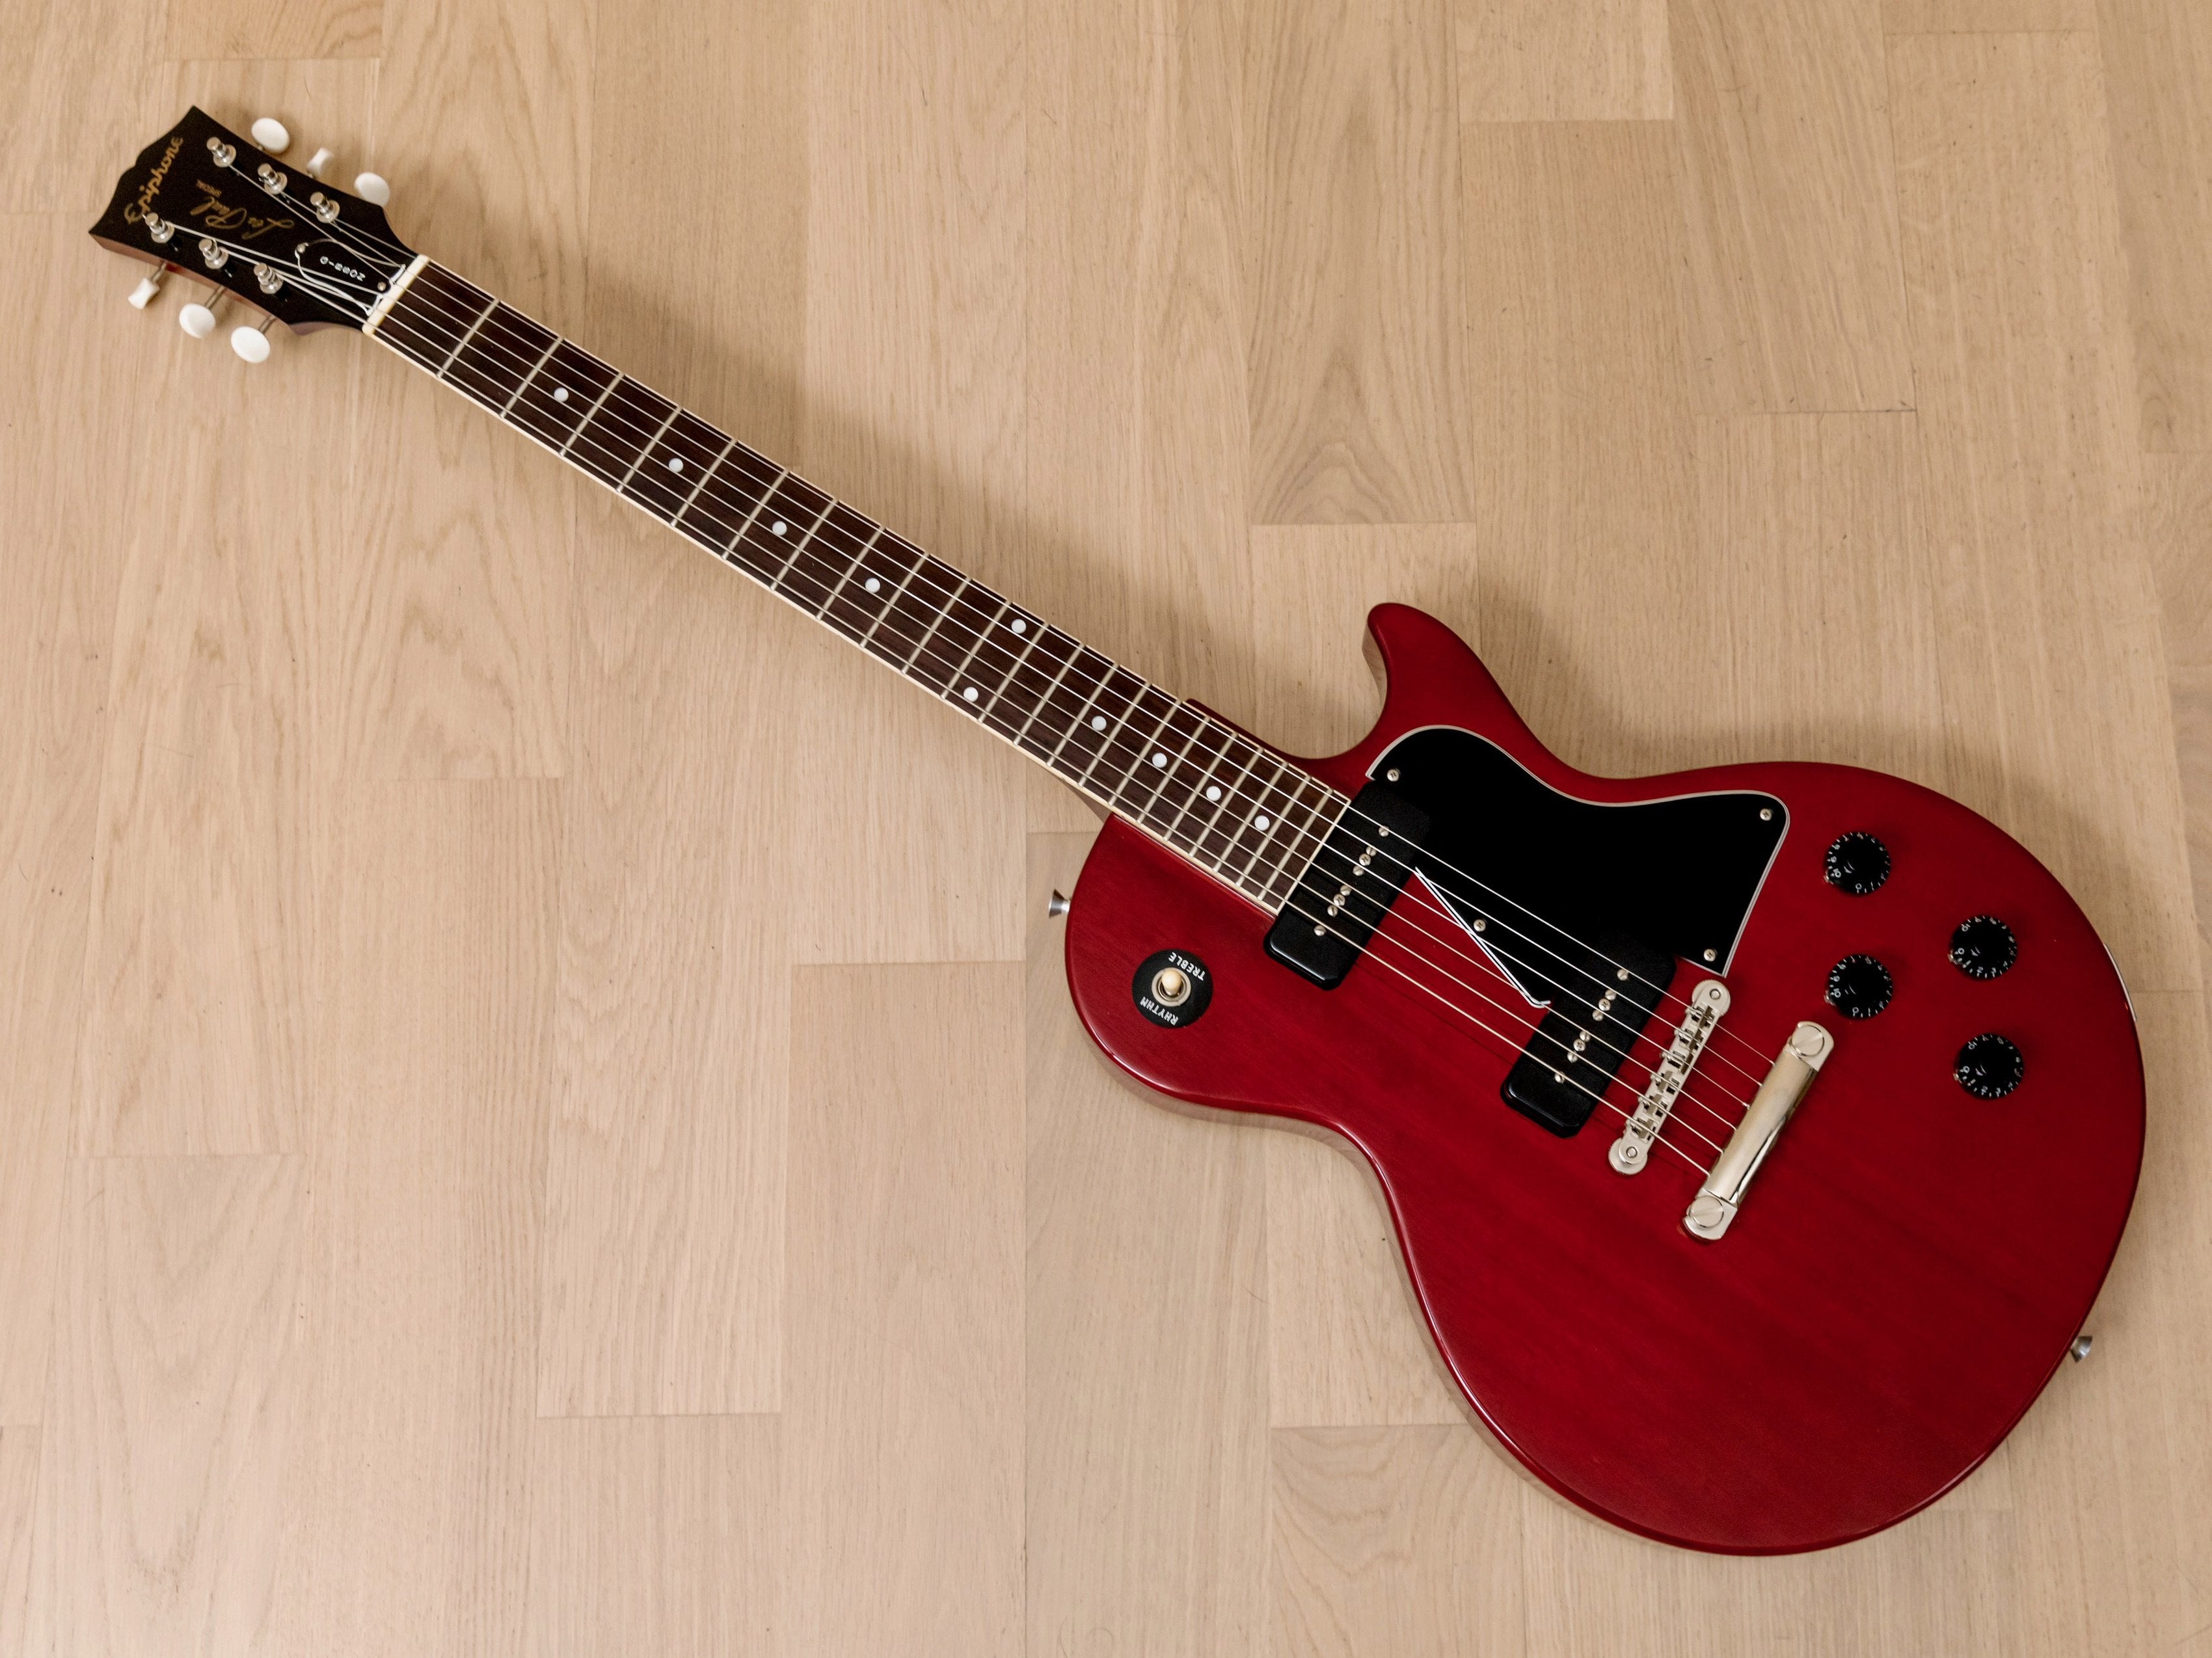 2006 Epiphone by Gibson Les Paul Special Lacquer Series Cherry w/ P-90s, Japan Fujigen